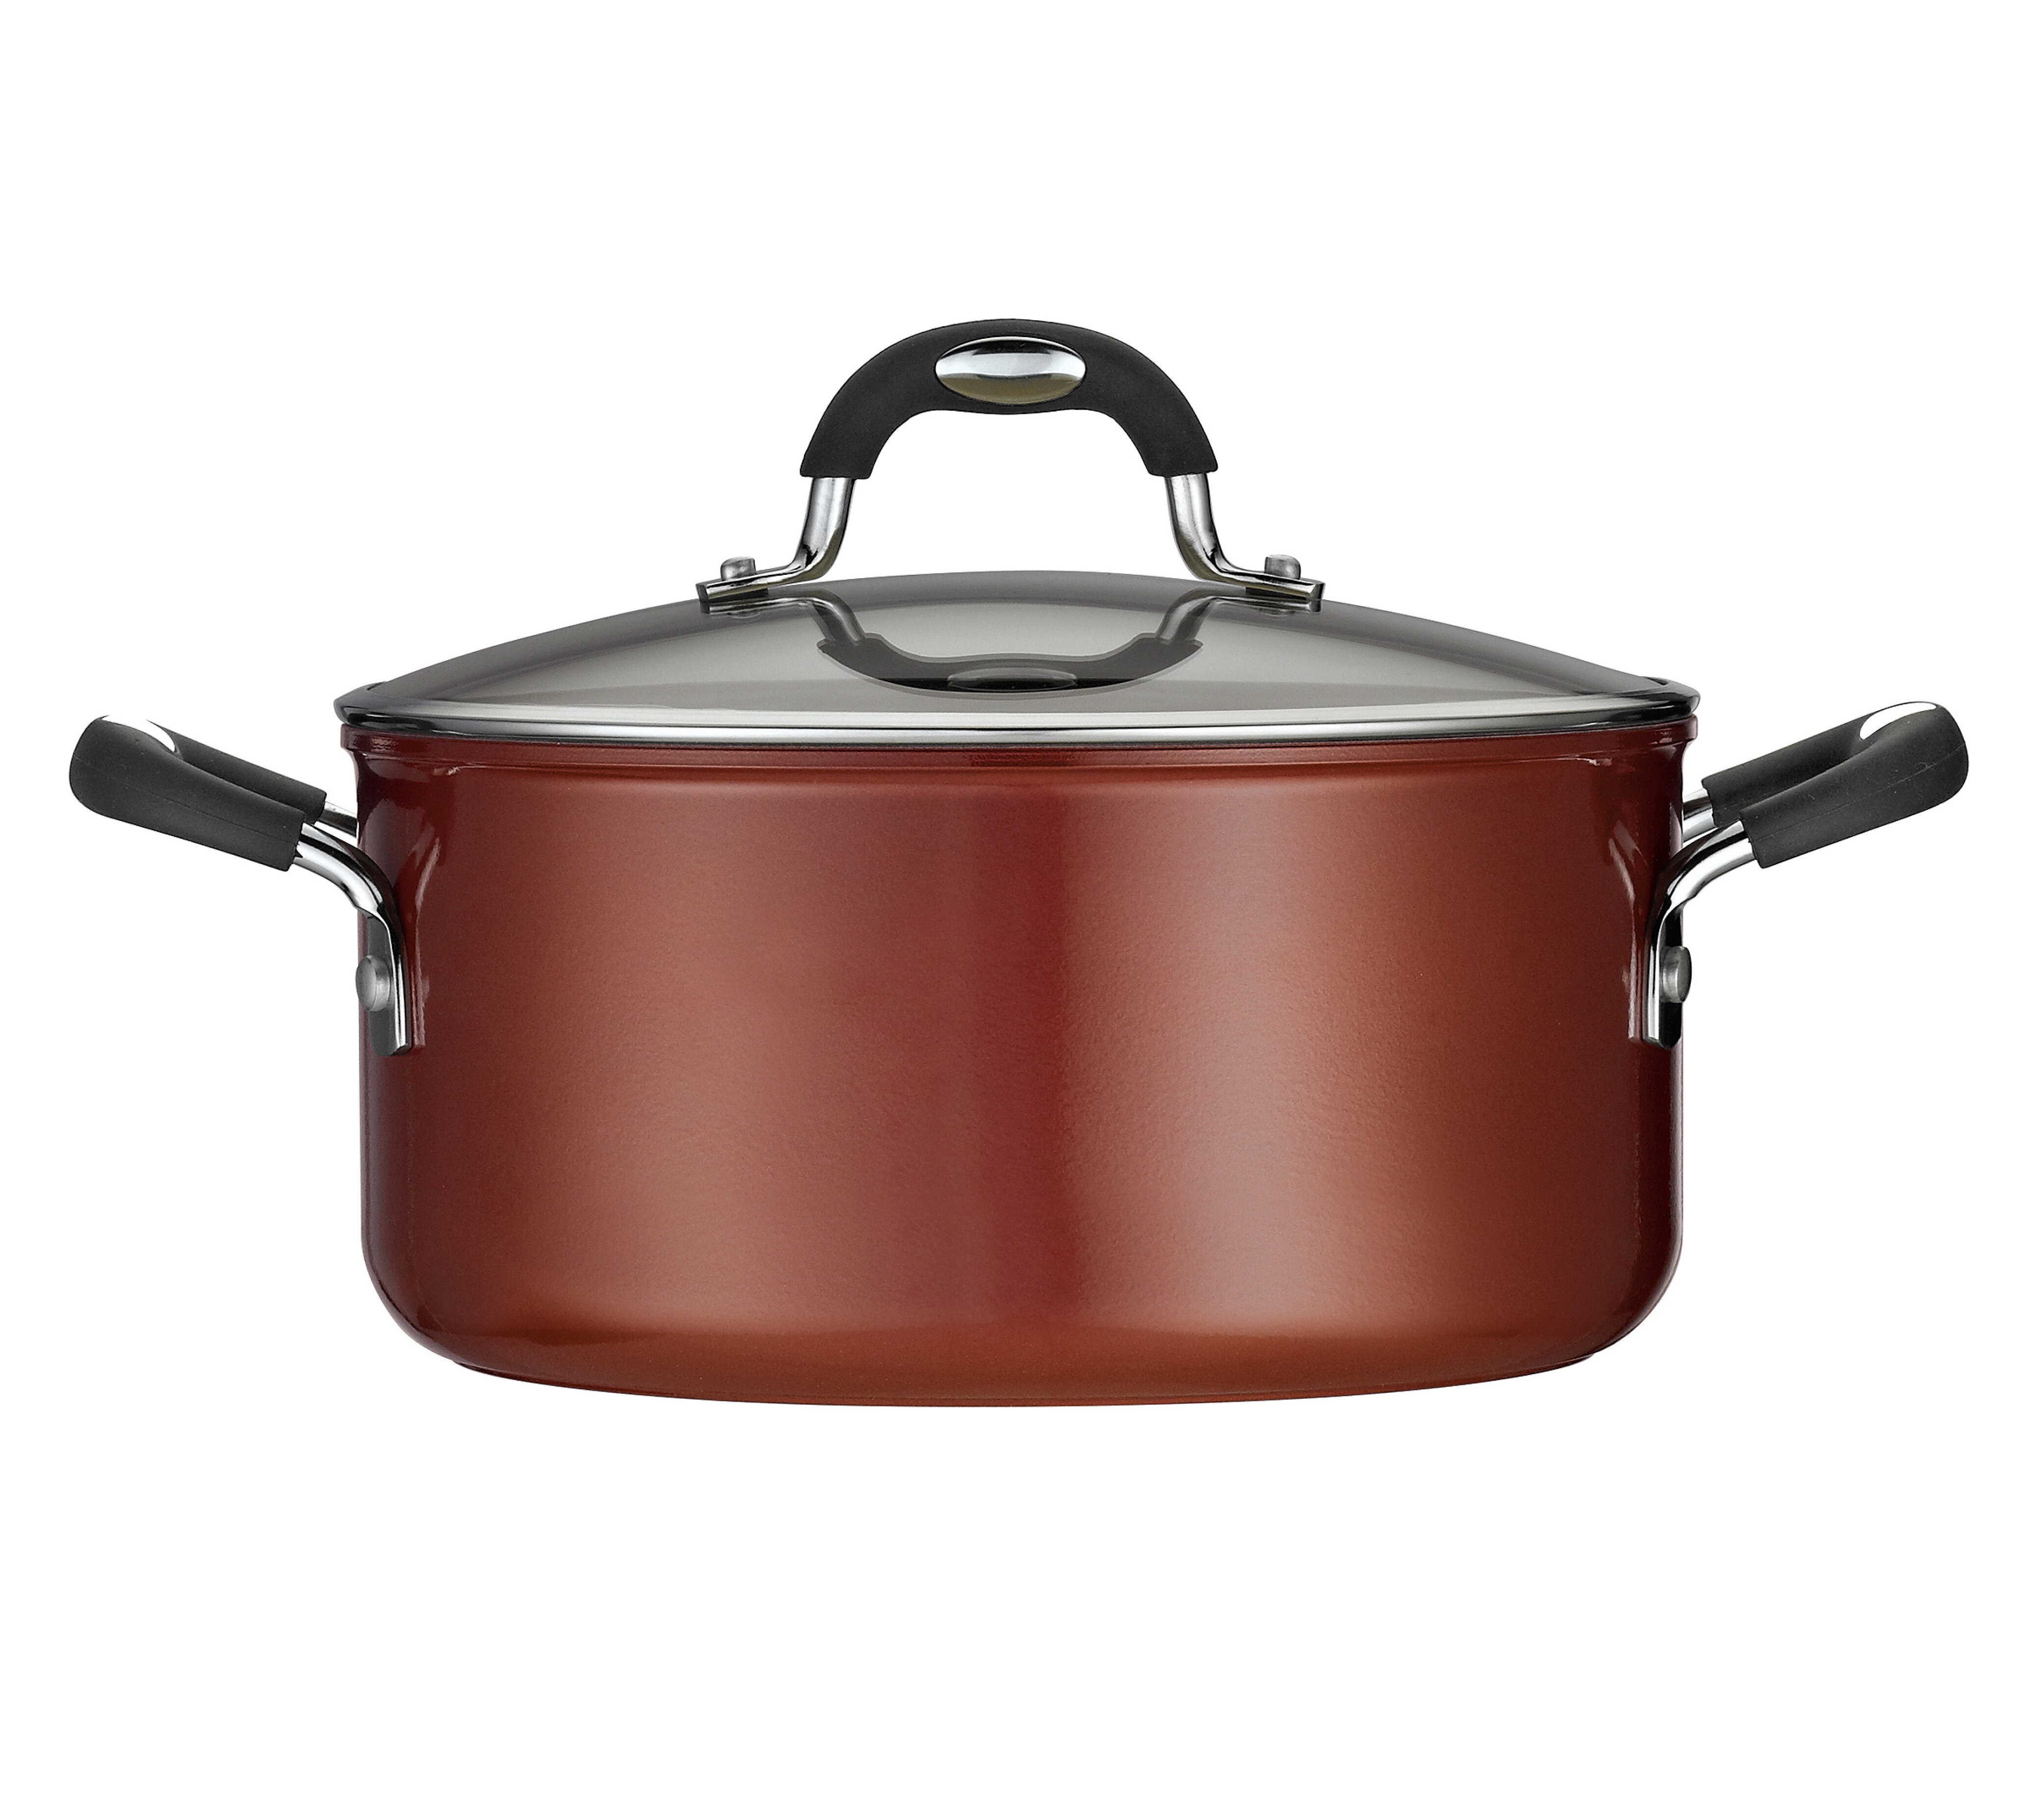 Lodge Cook-It-All Cast Iron Cookware - Lagrange Hardware